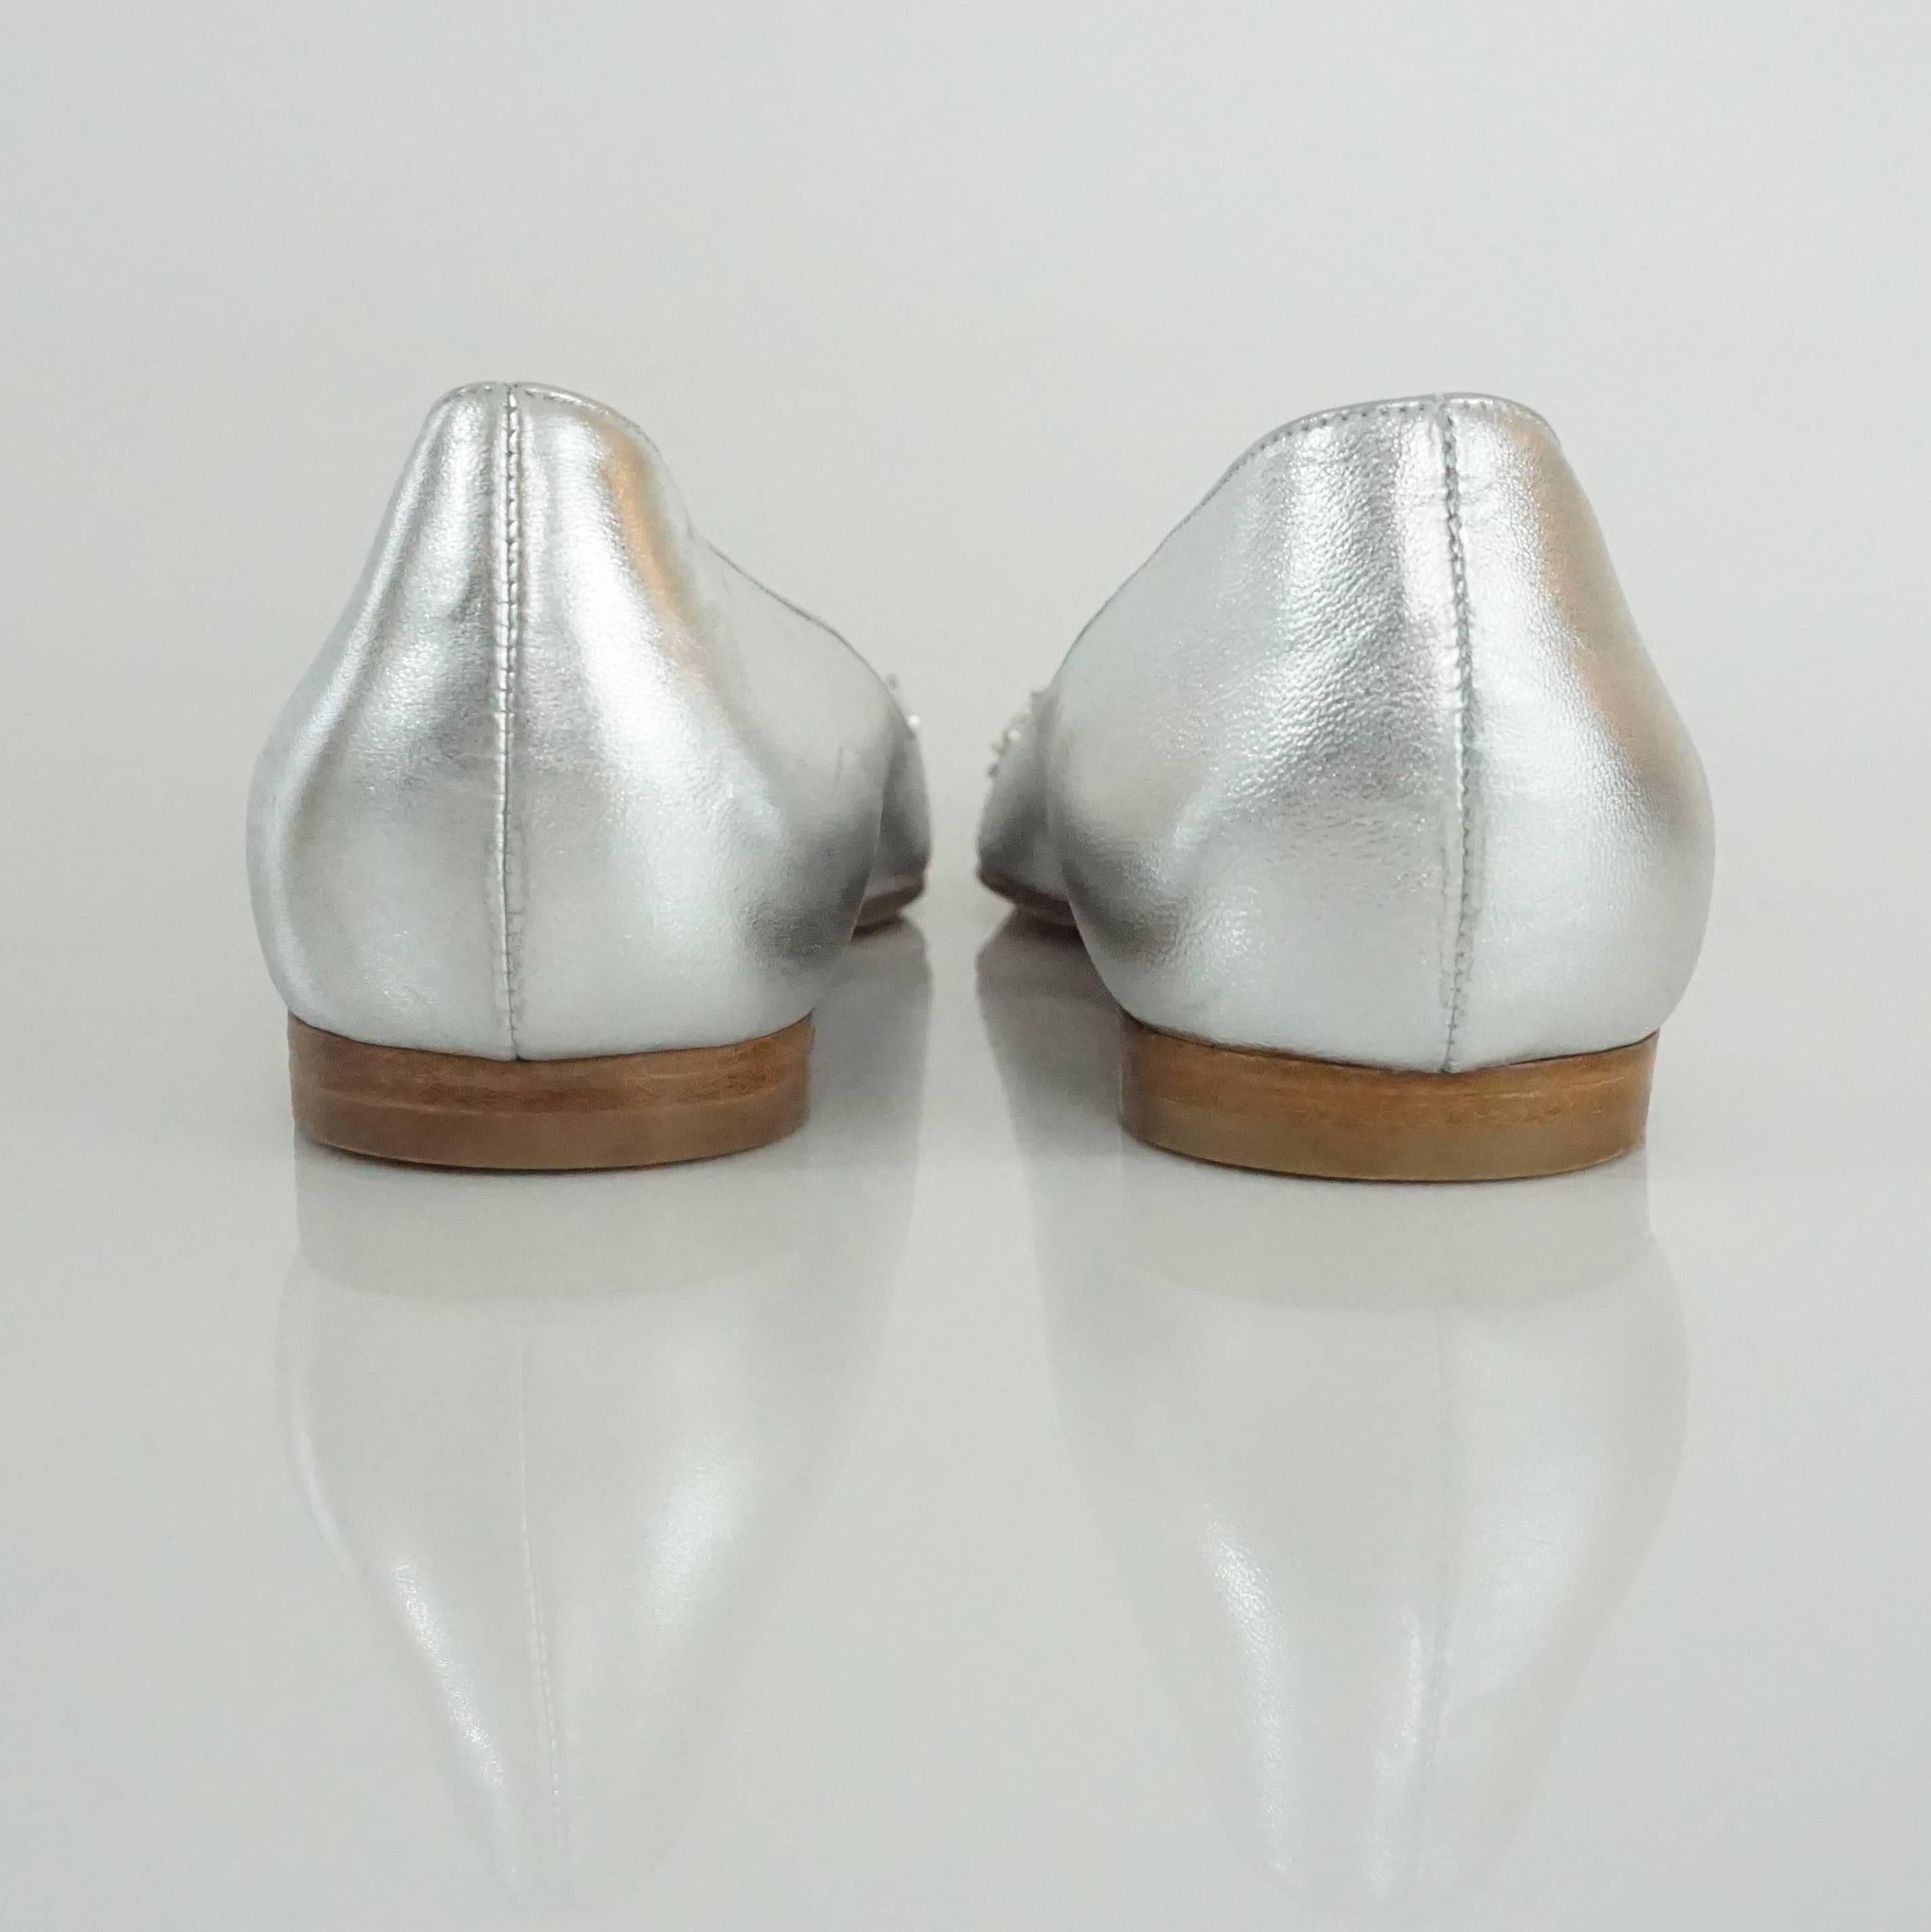 Women's Manolo Blahnik Silver Leather Flats with Rhinestone and Pearl Detail - 40